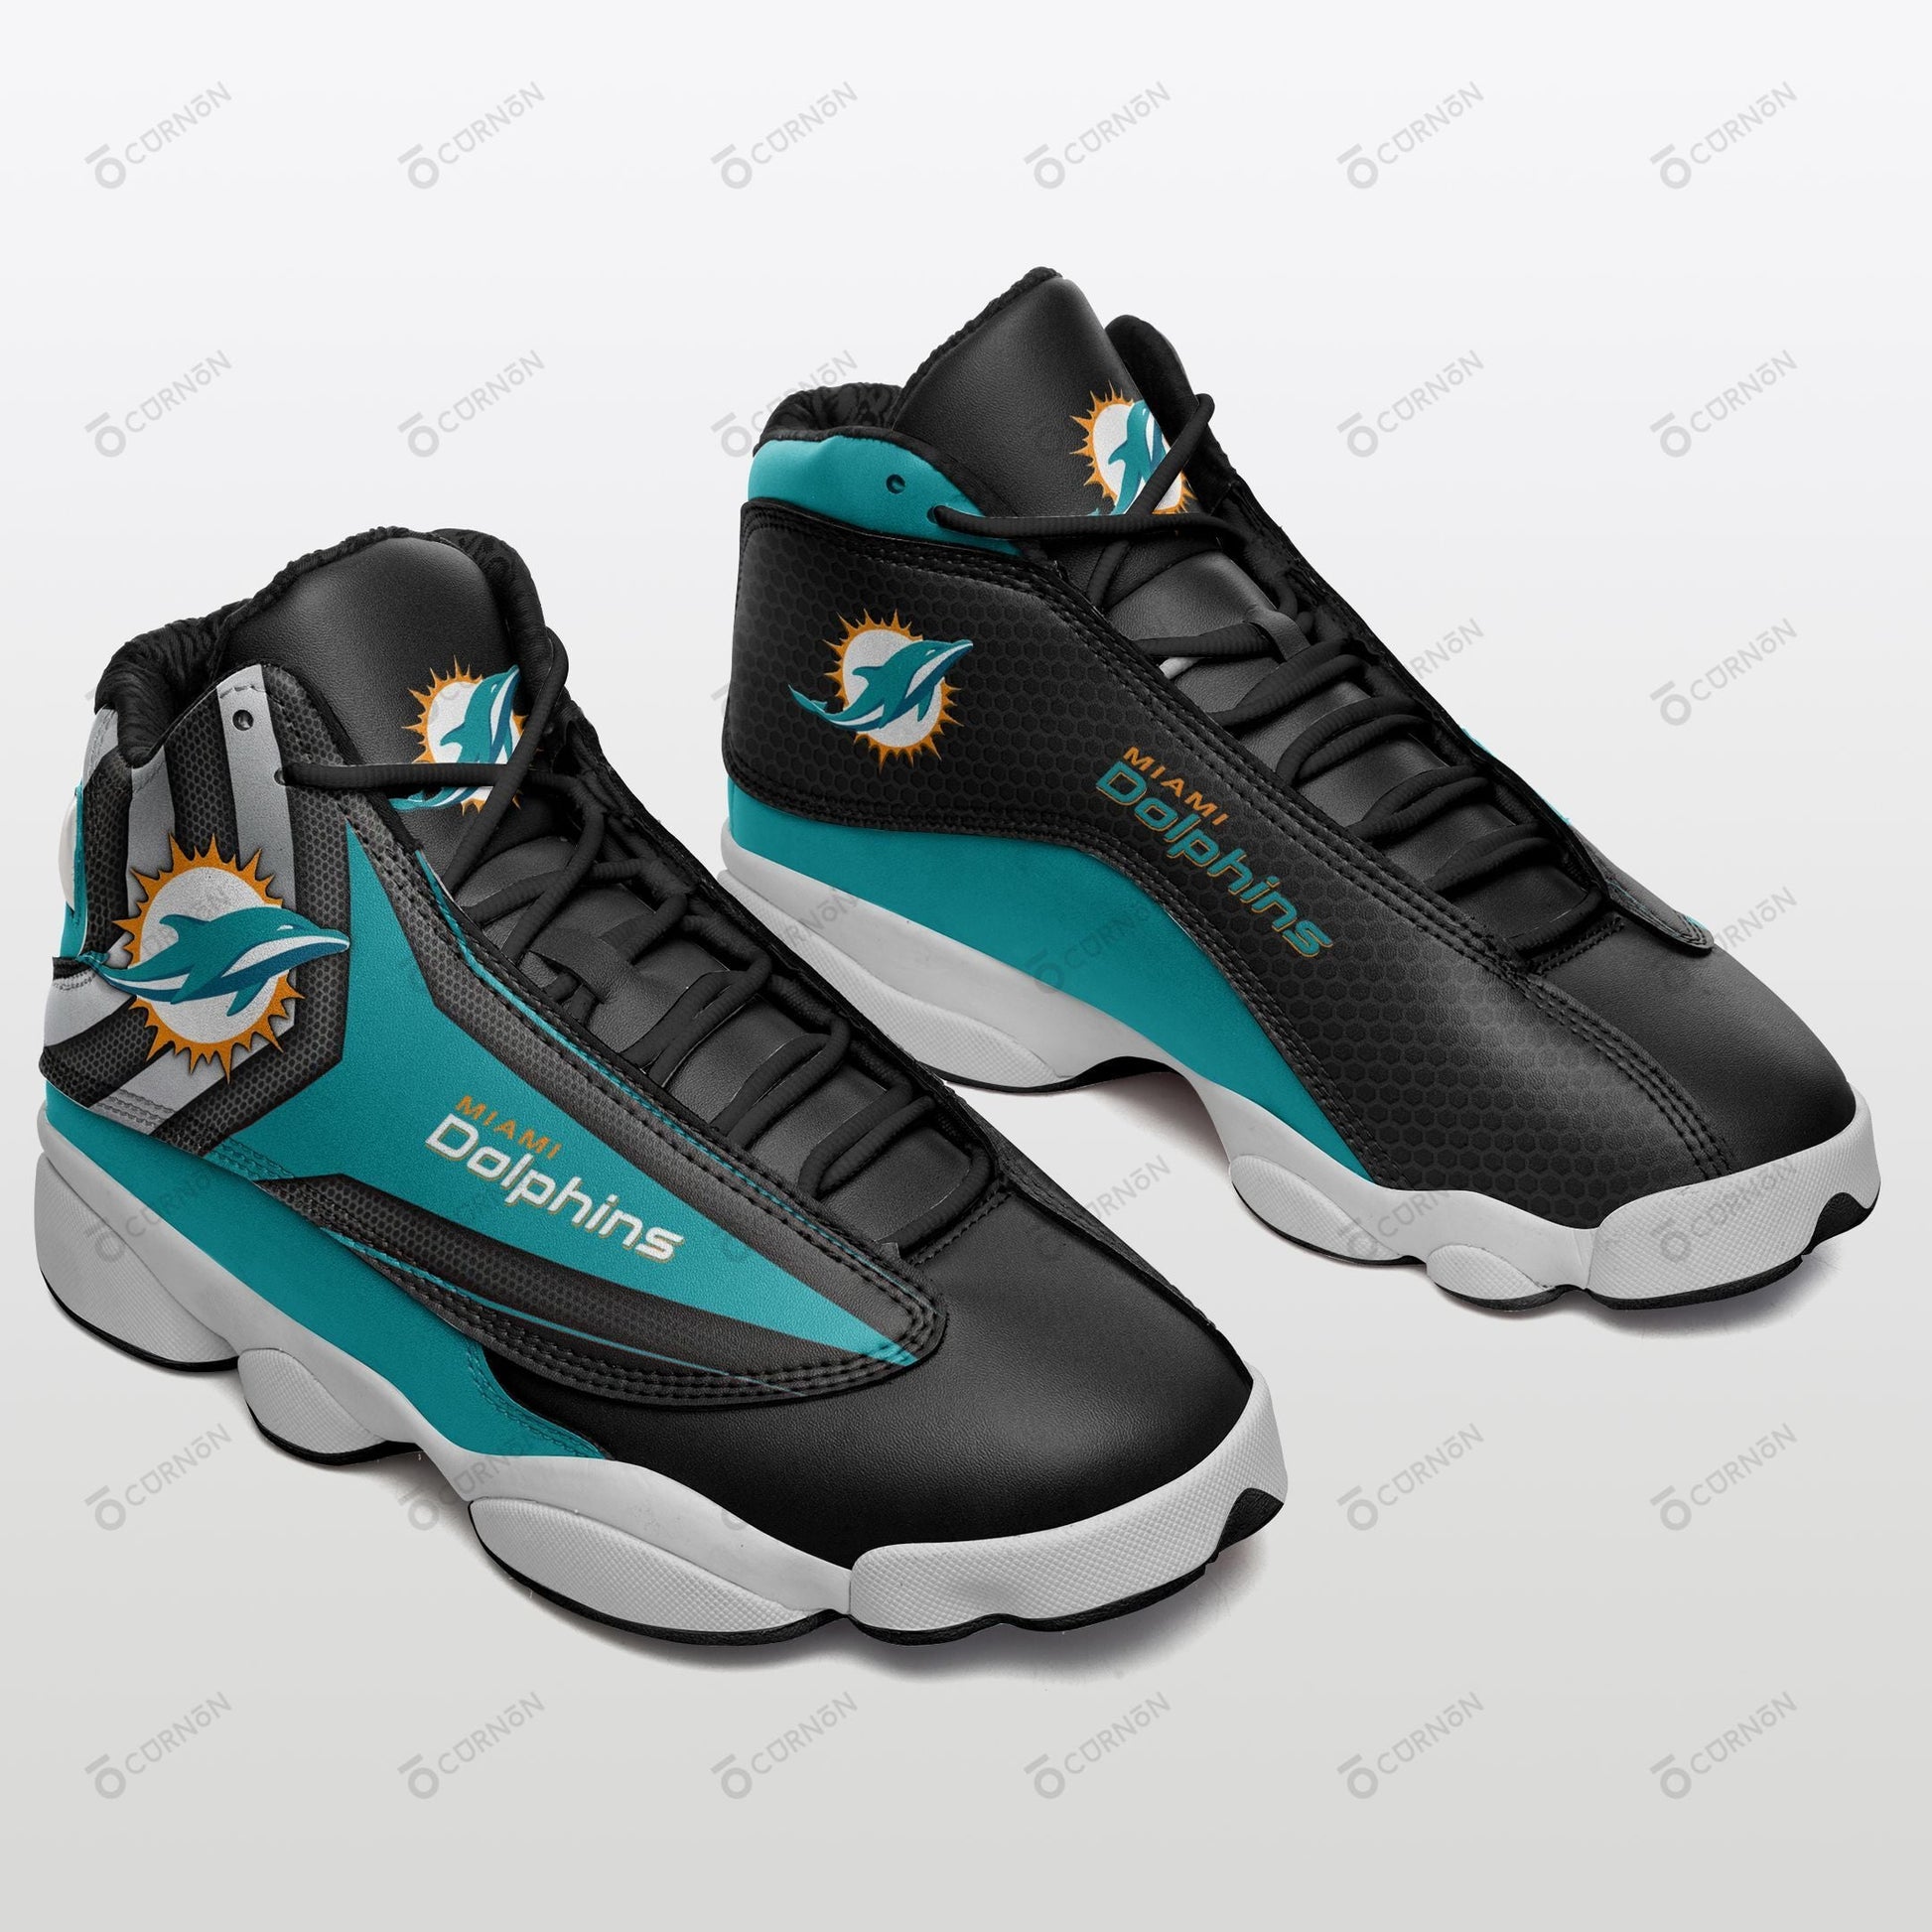 Miami Dolphins Custom Shoes Sneakers 388-Gear Wanta